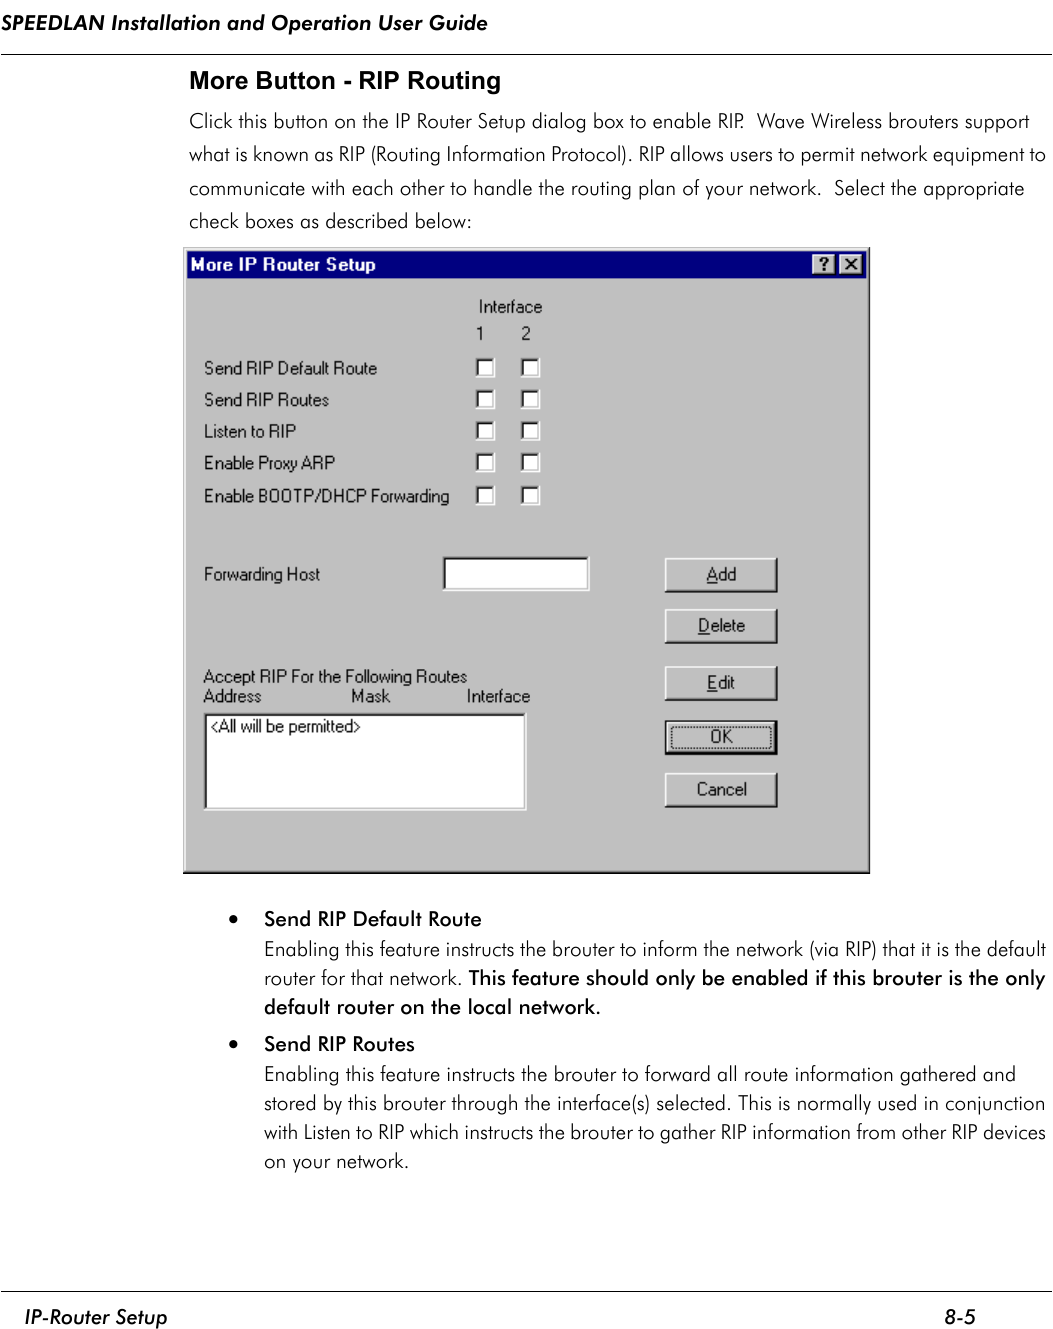 SPEEDLAN Installation and Operation User Guide     IP-Router Setup 8-5                                                                                                                                                              More Button - RIP Routing Click this button on the IP Router Setup dialog box to enable RIP.  Wave Wireless brouters support what is known as RIP (Routing Information Protocol). RIP allows users to permit network equipment to communicate with each other to handle the routing plan of your network.  Select the appropriate check boxes as described below:• Send RIP Default RouteEnabling this feature instructs the brouter to inform the network (via RIP) that it is the default router for that network. This feature should only be enabled if this brouter is the only default router on the local network. •Send RIP RoutesEnabling this feature instructs the brouter to forward all route information gathered and stored by this brouter through the interface(s) selected. This is normally used in conjunction with Listen to RIP which instructs the brouter to gather RIP information from other RIP devices on your network. 